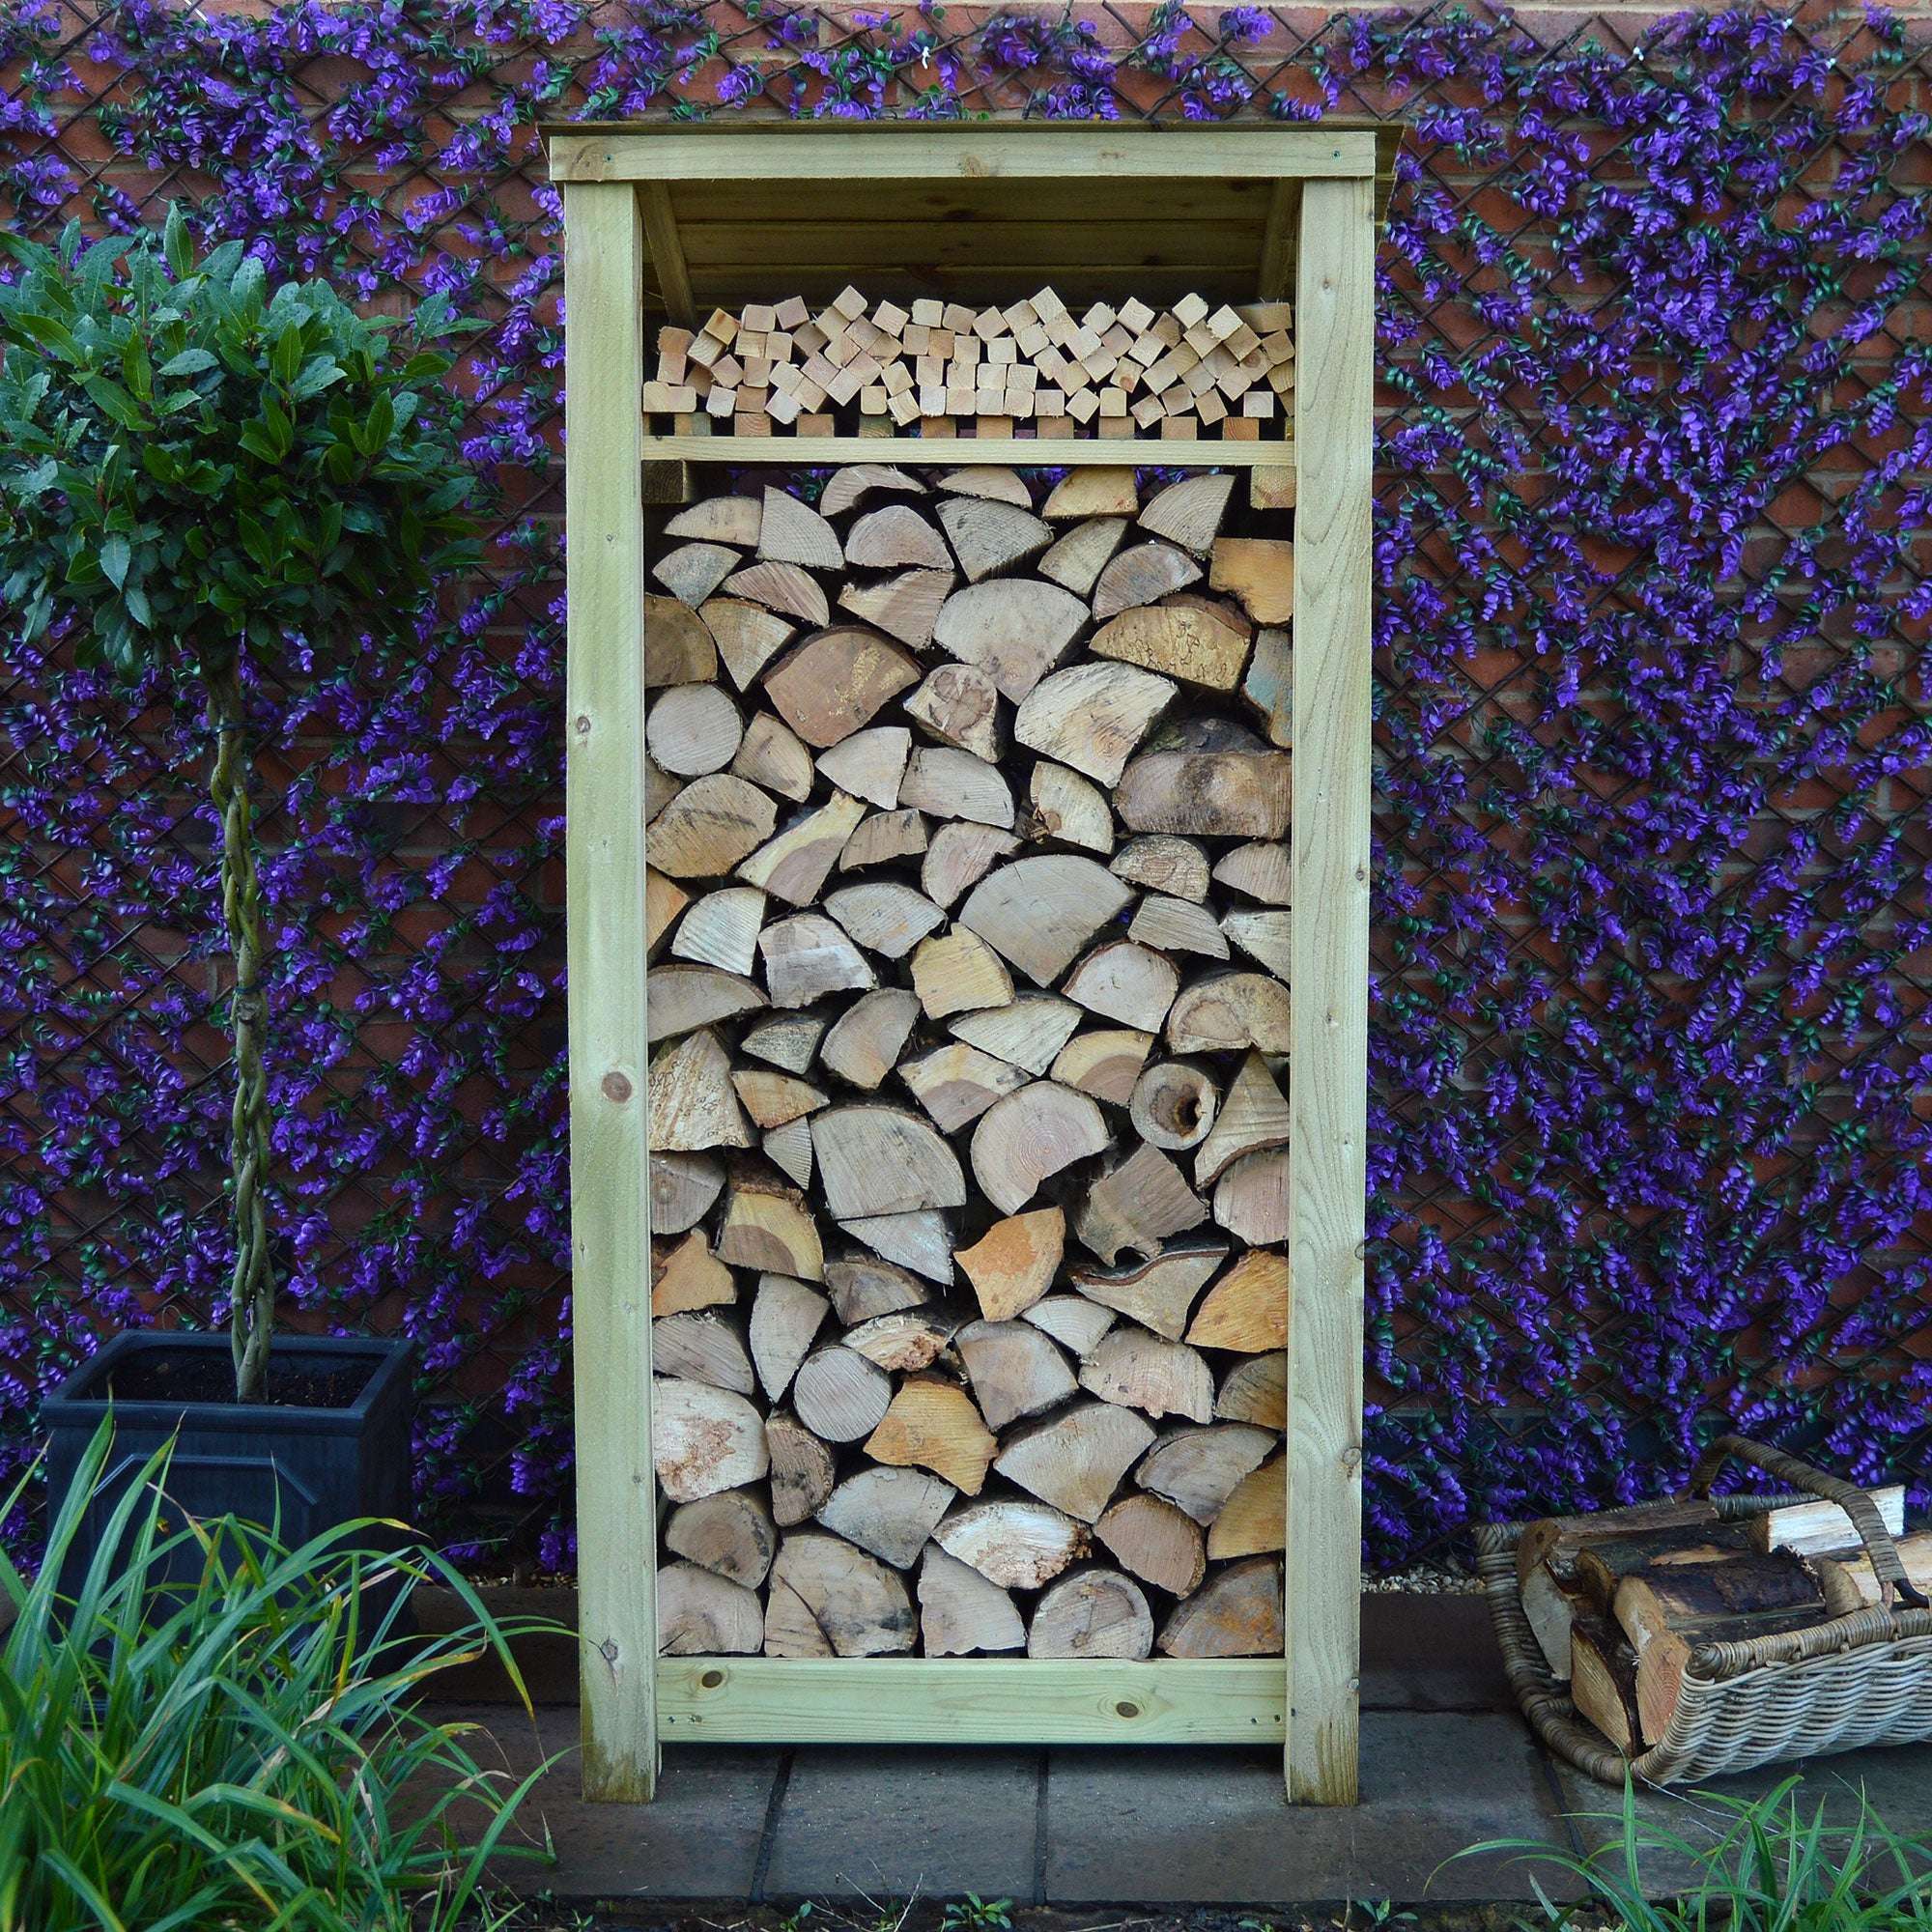 Rutland Country Burley Log Store with Kindling Shelf - 6ft:Rutland County,Exceptional Garden